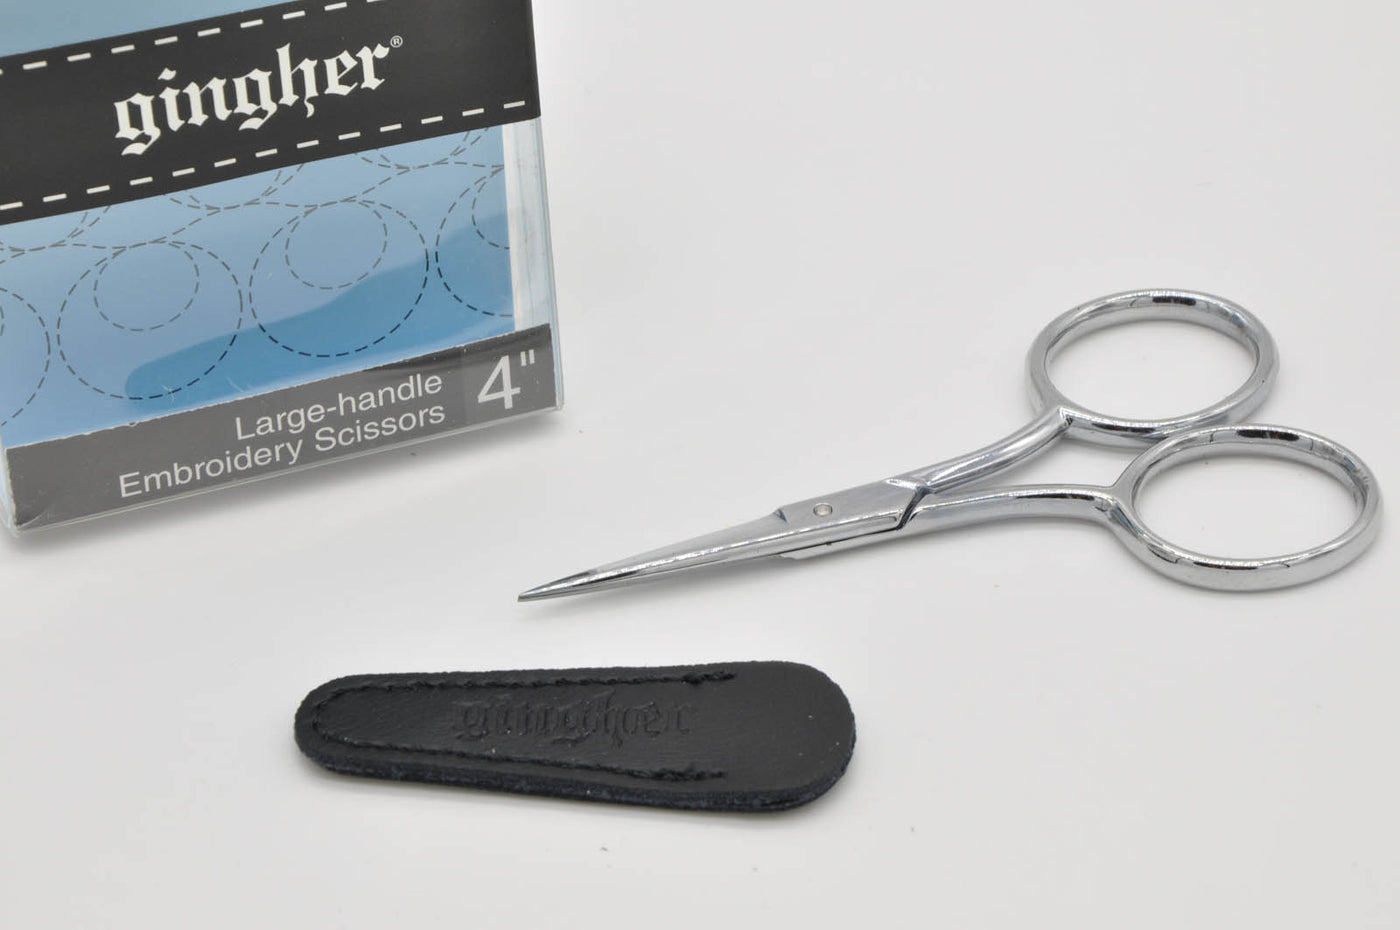 Gingher Light-Weight Embroidery Scissors - 4